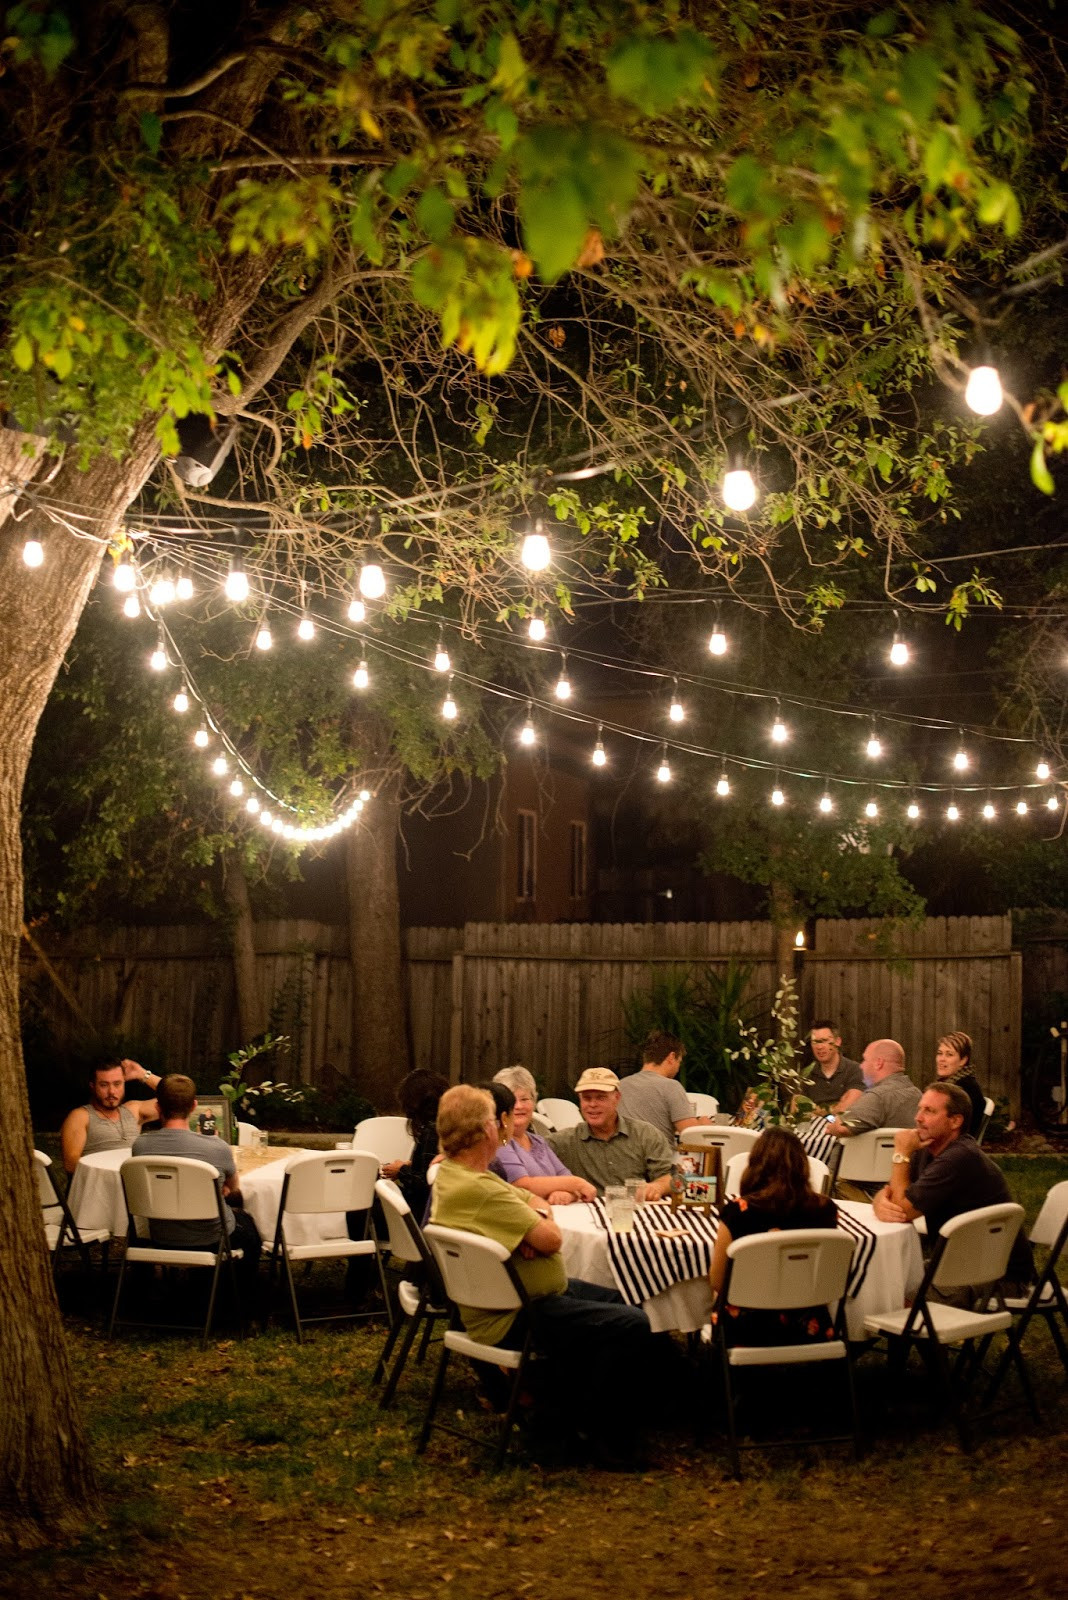 Ideas For Backyard Party
 Domestic Fashionista Backyard Birthday Party For the Guy